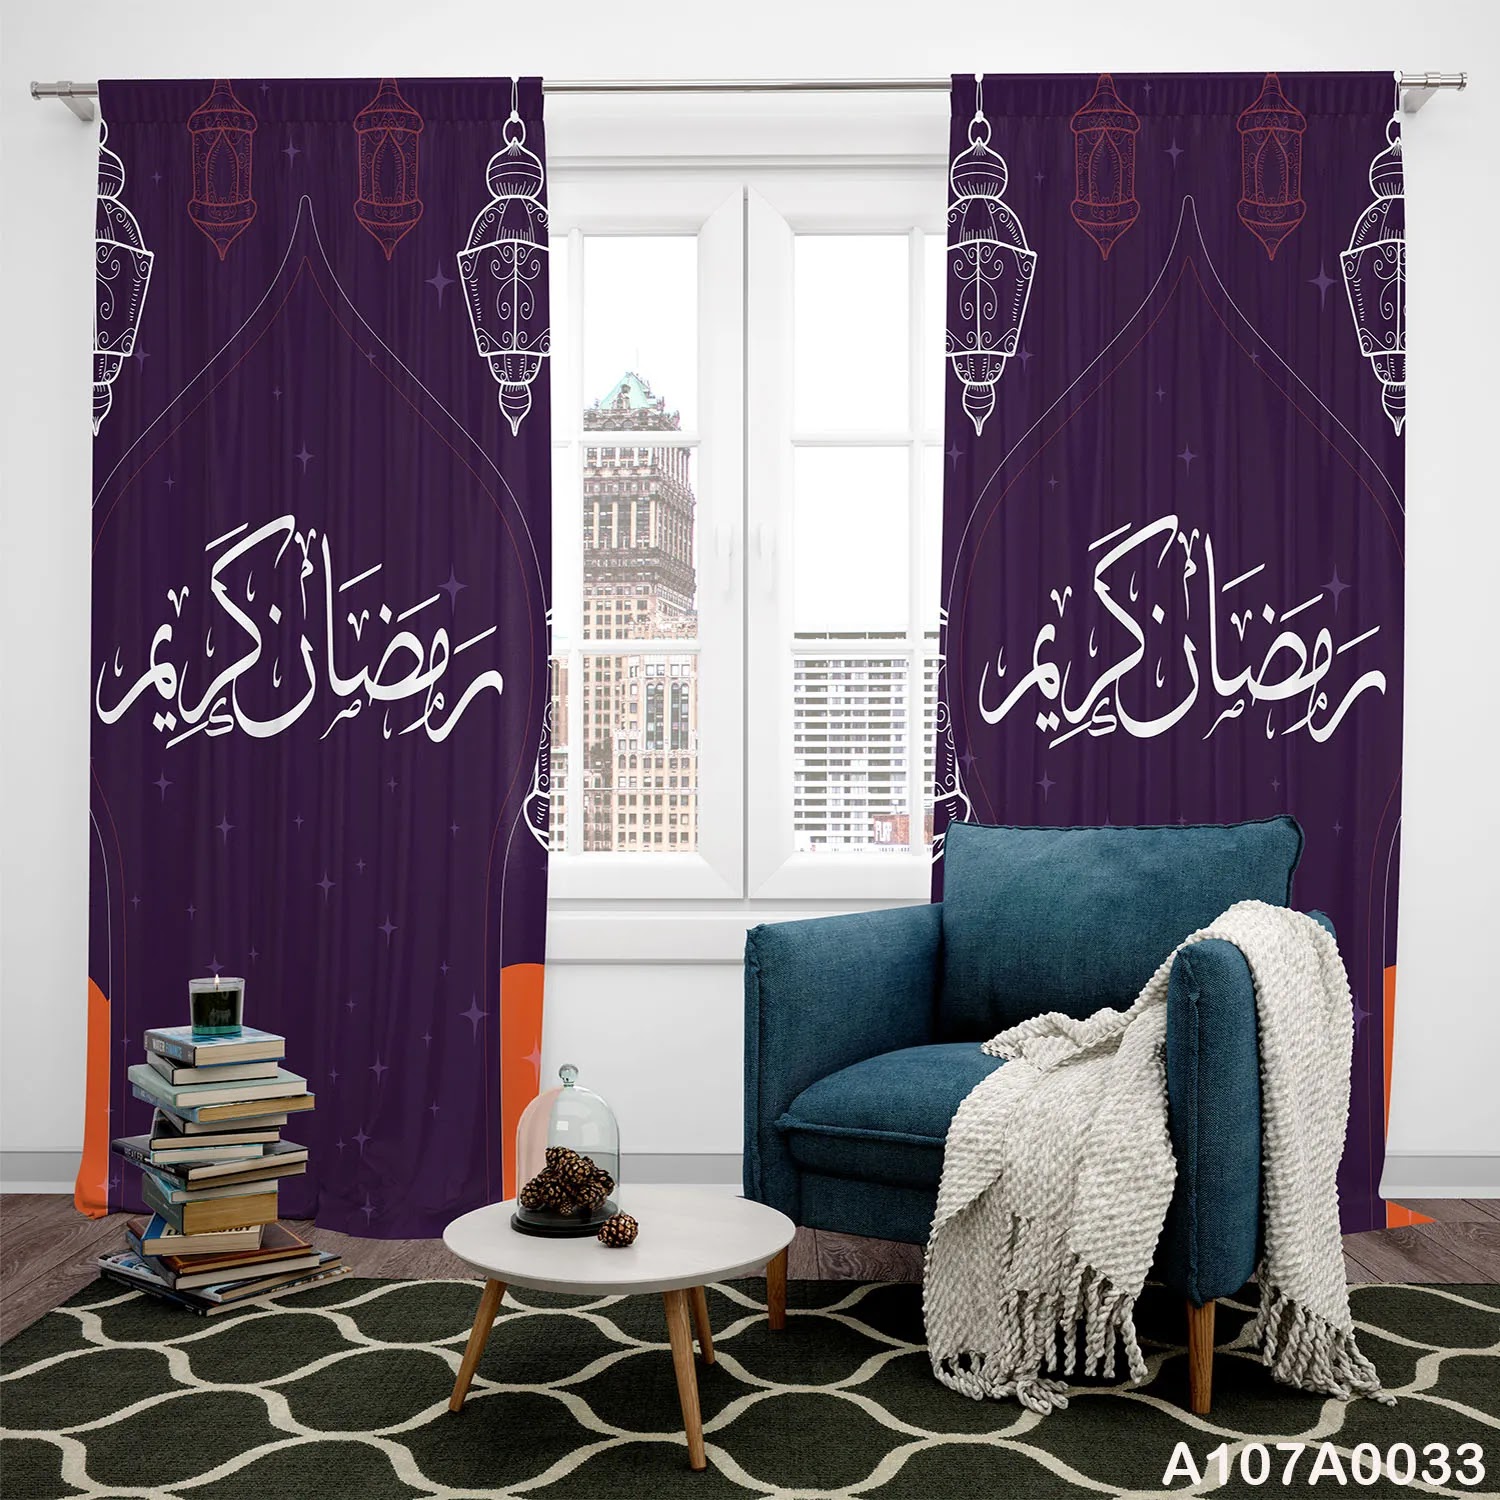 Curtains for Ramadan in violet and white